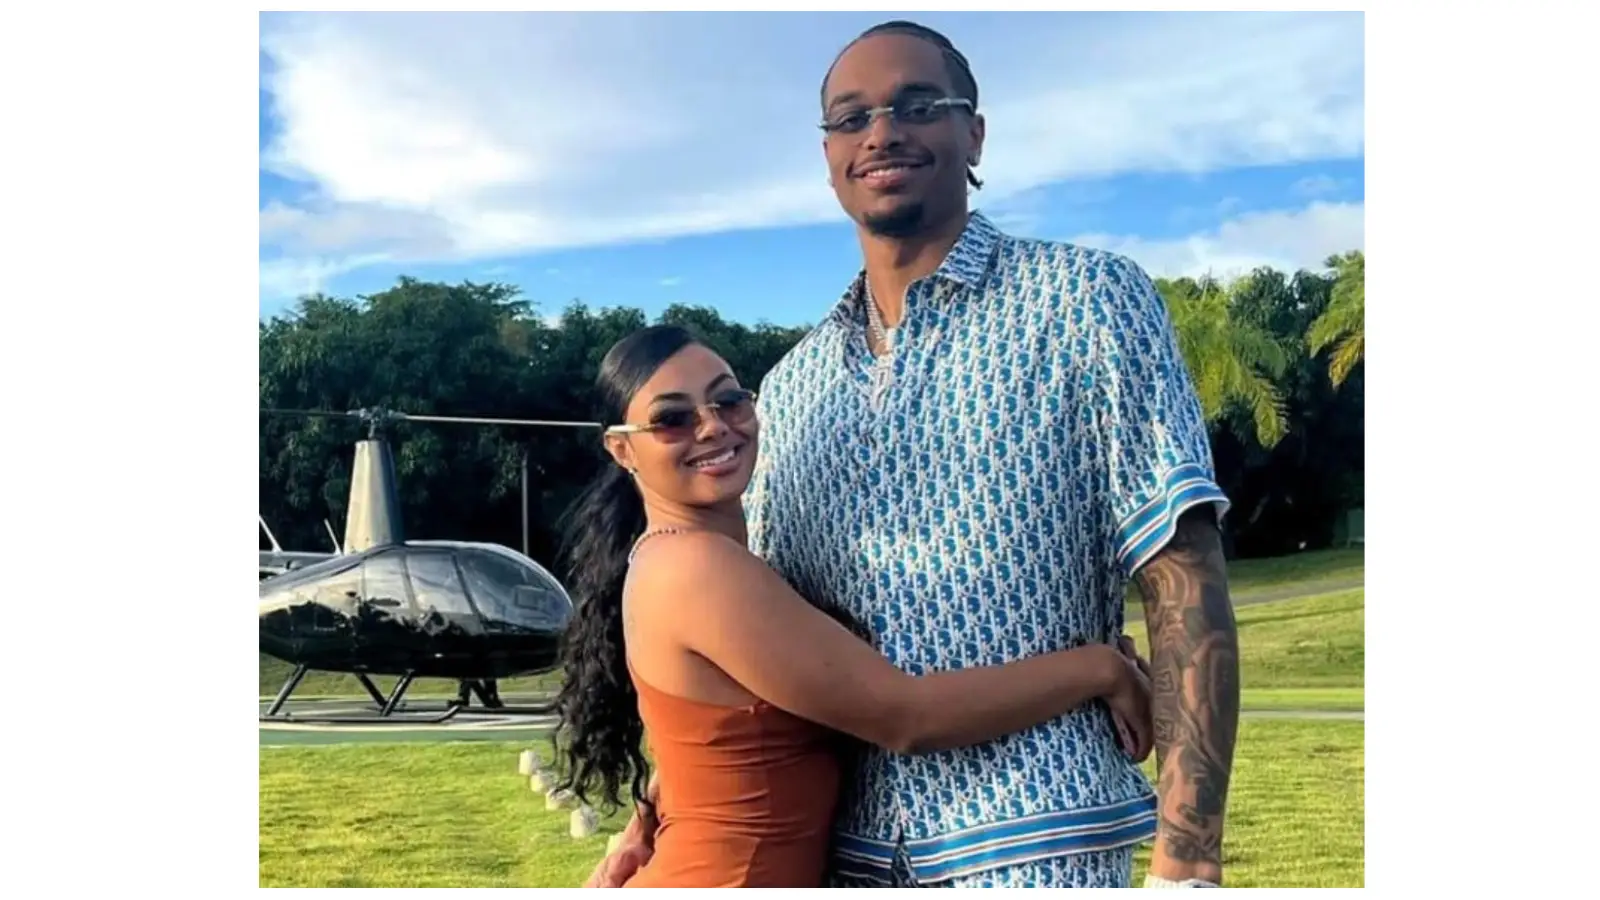 Who is the fiance of  Washington? Know all about Alisah Chanel.